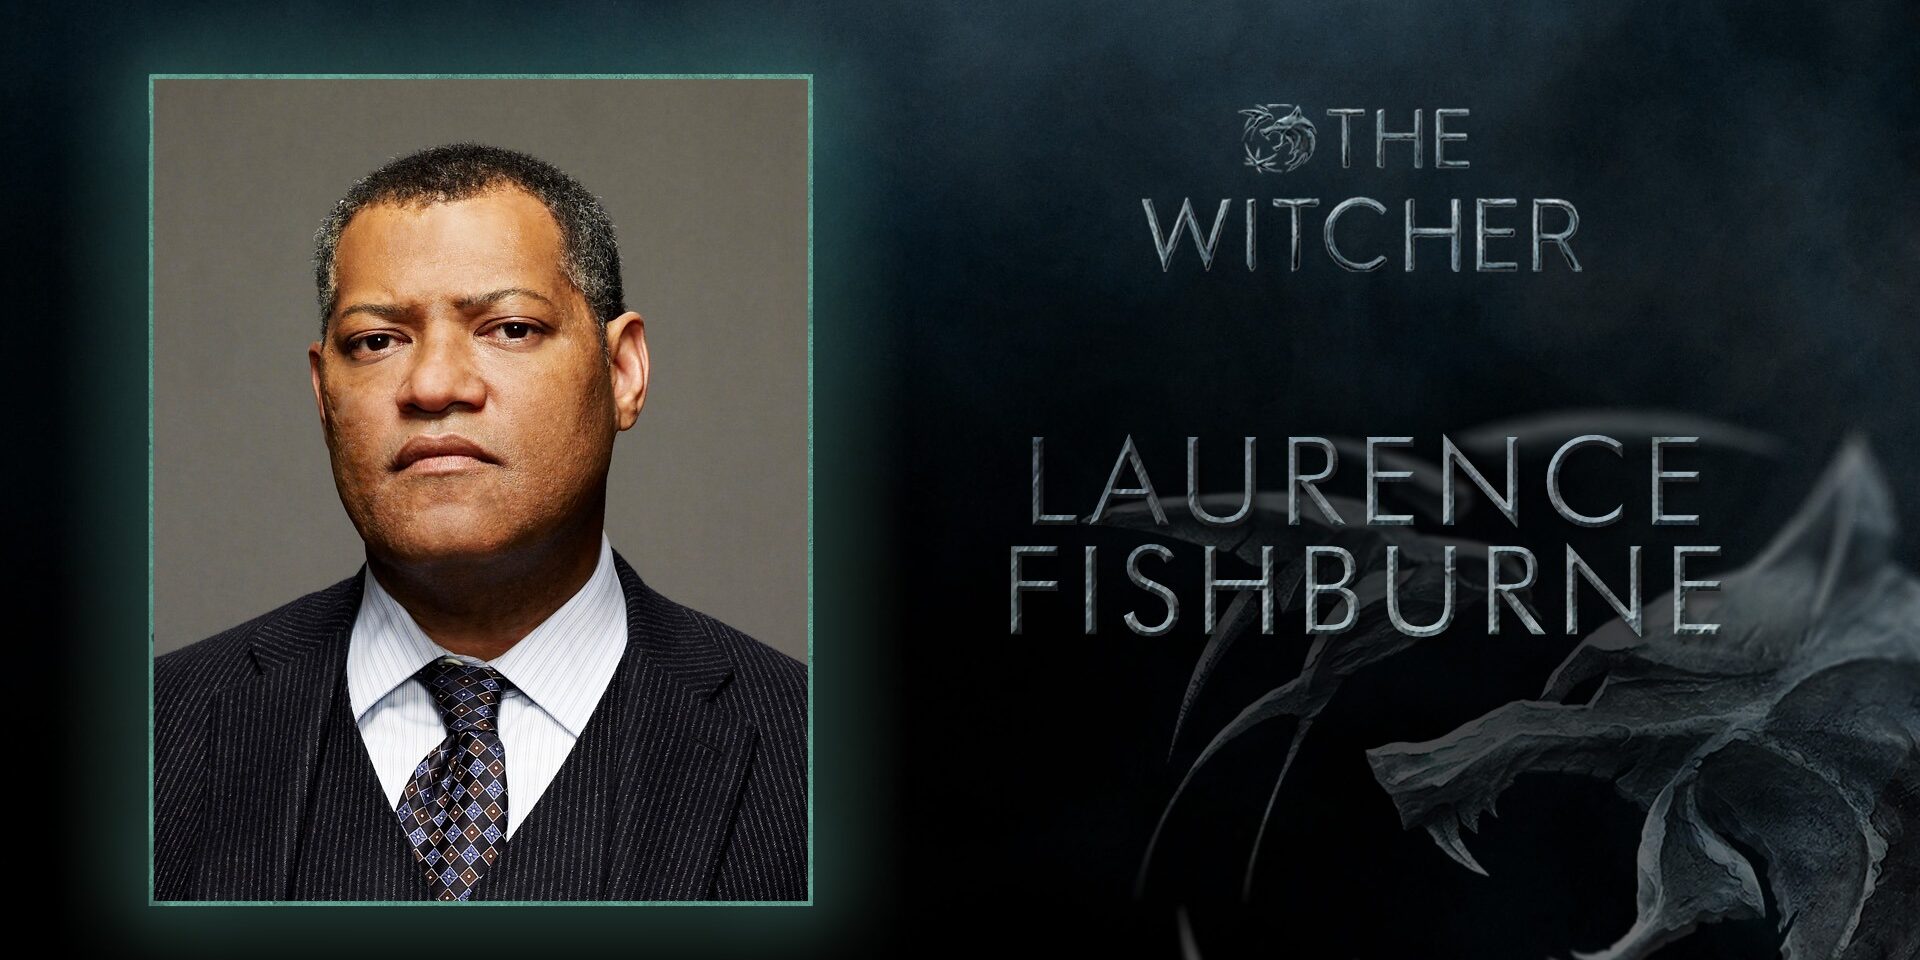 Vampire Regis will be played by Laurence Fishburne from The Matrix in season 4 of The Witcher